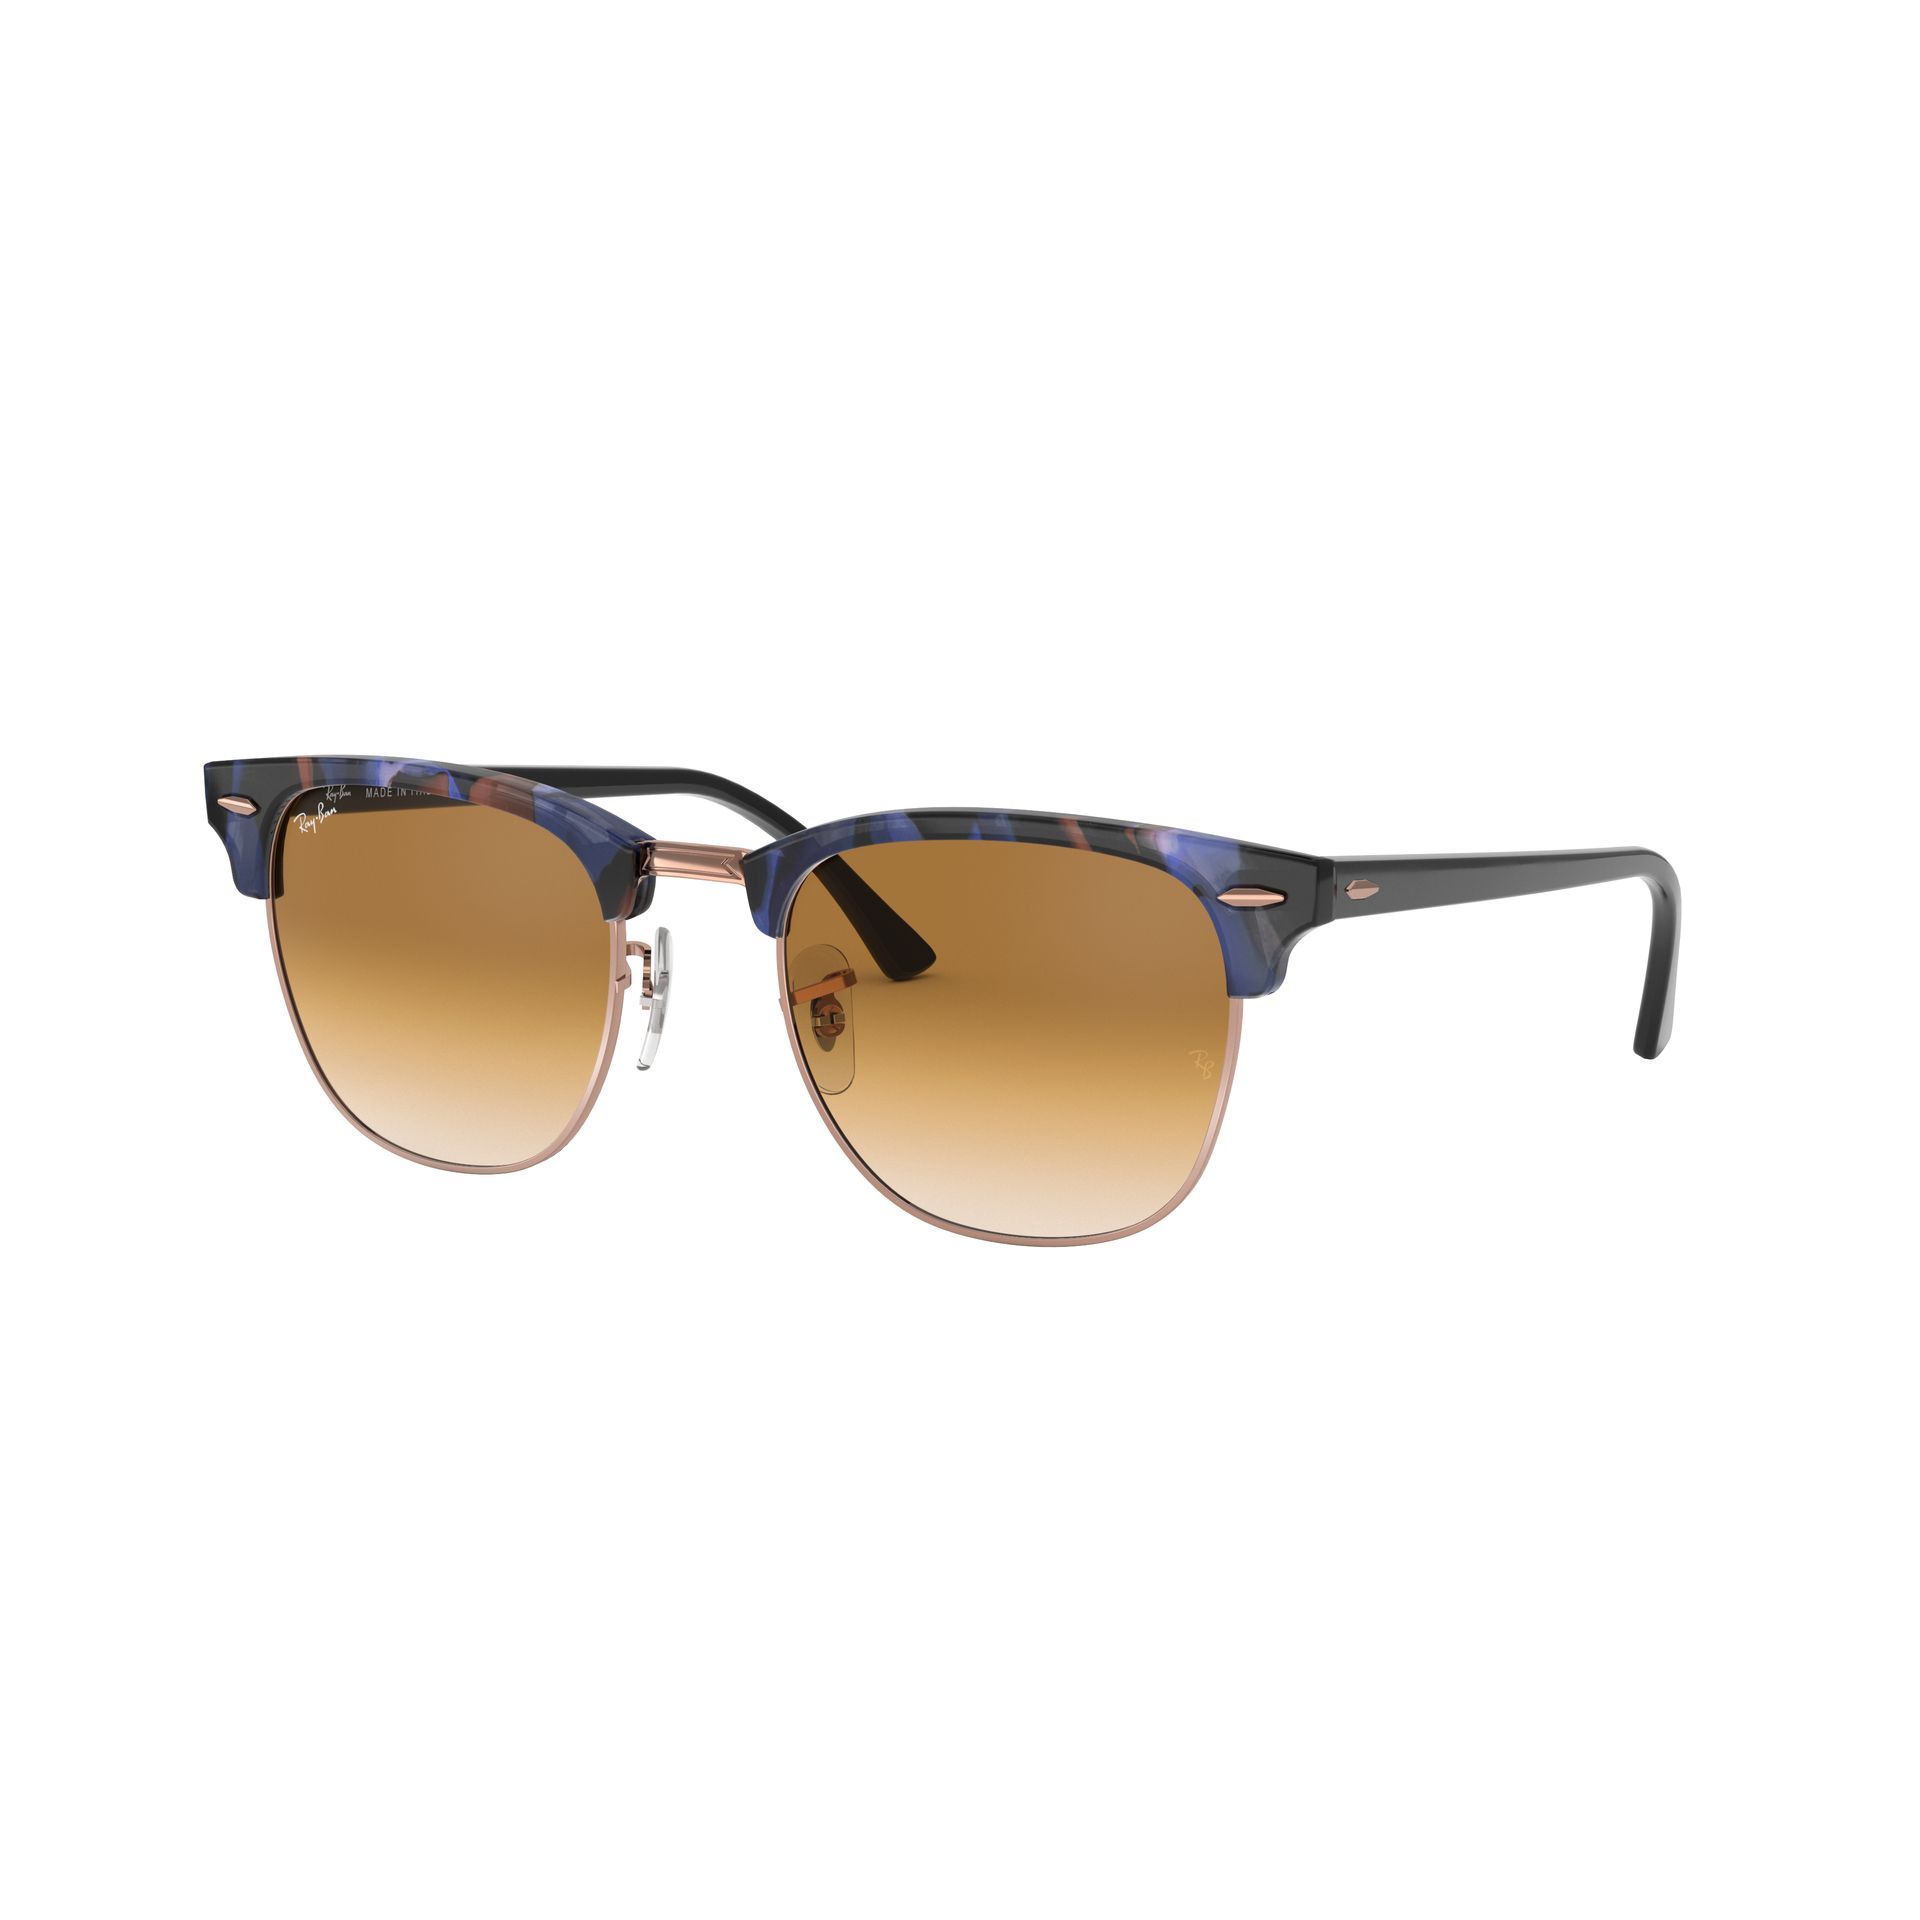 0RB3016 Clubmaster Sunglasses 125651 - size 51